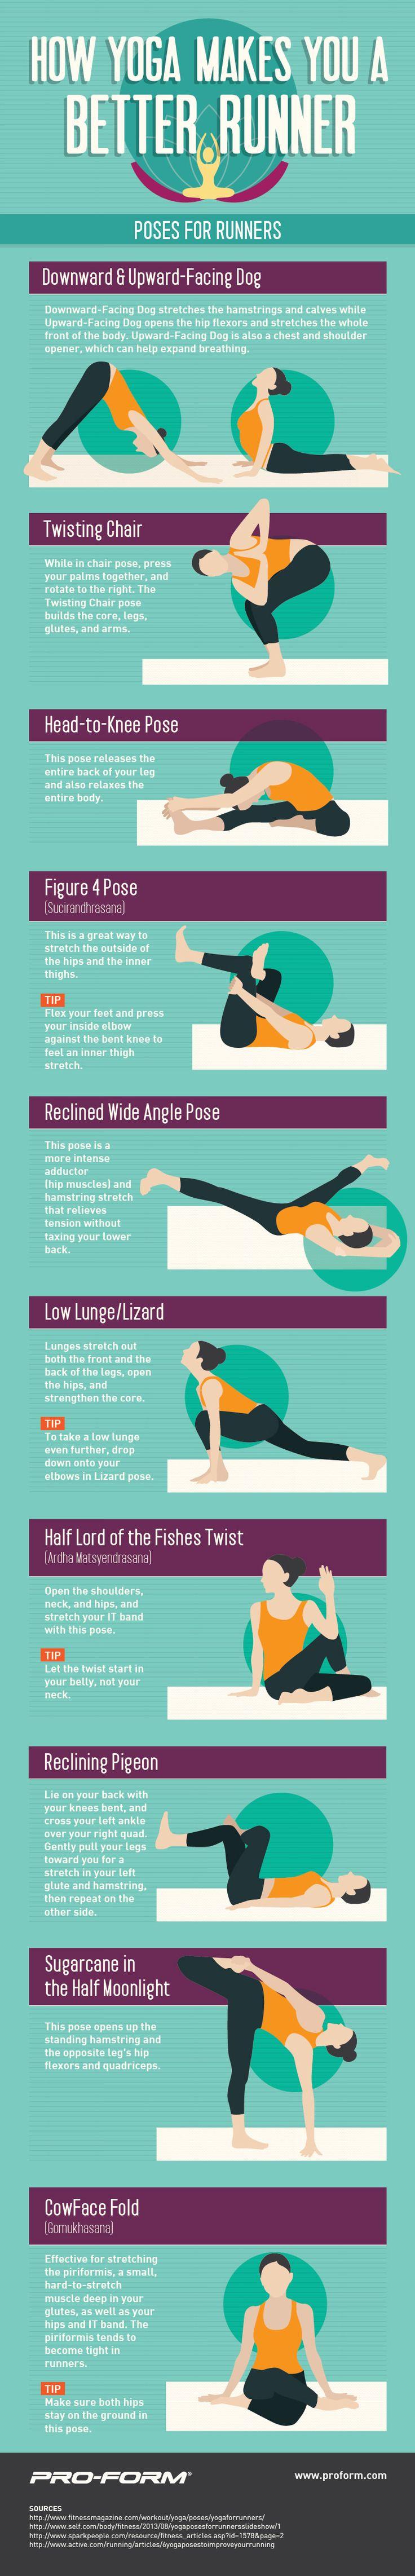 Wedding - How Yoga Makes You A Better Runner: Poses For Runners 